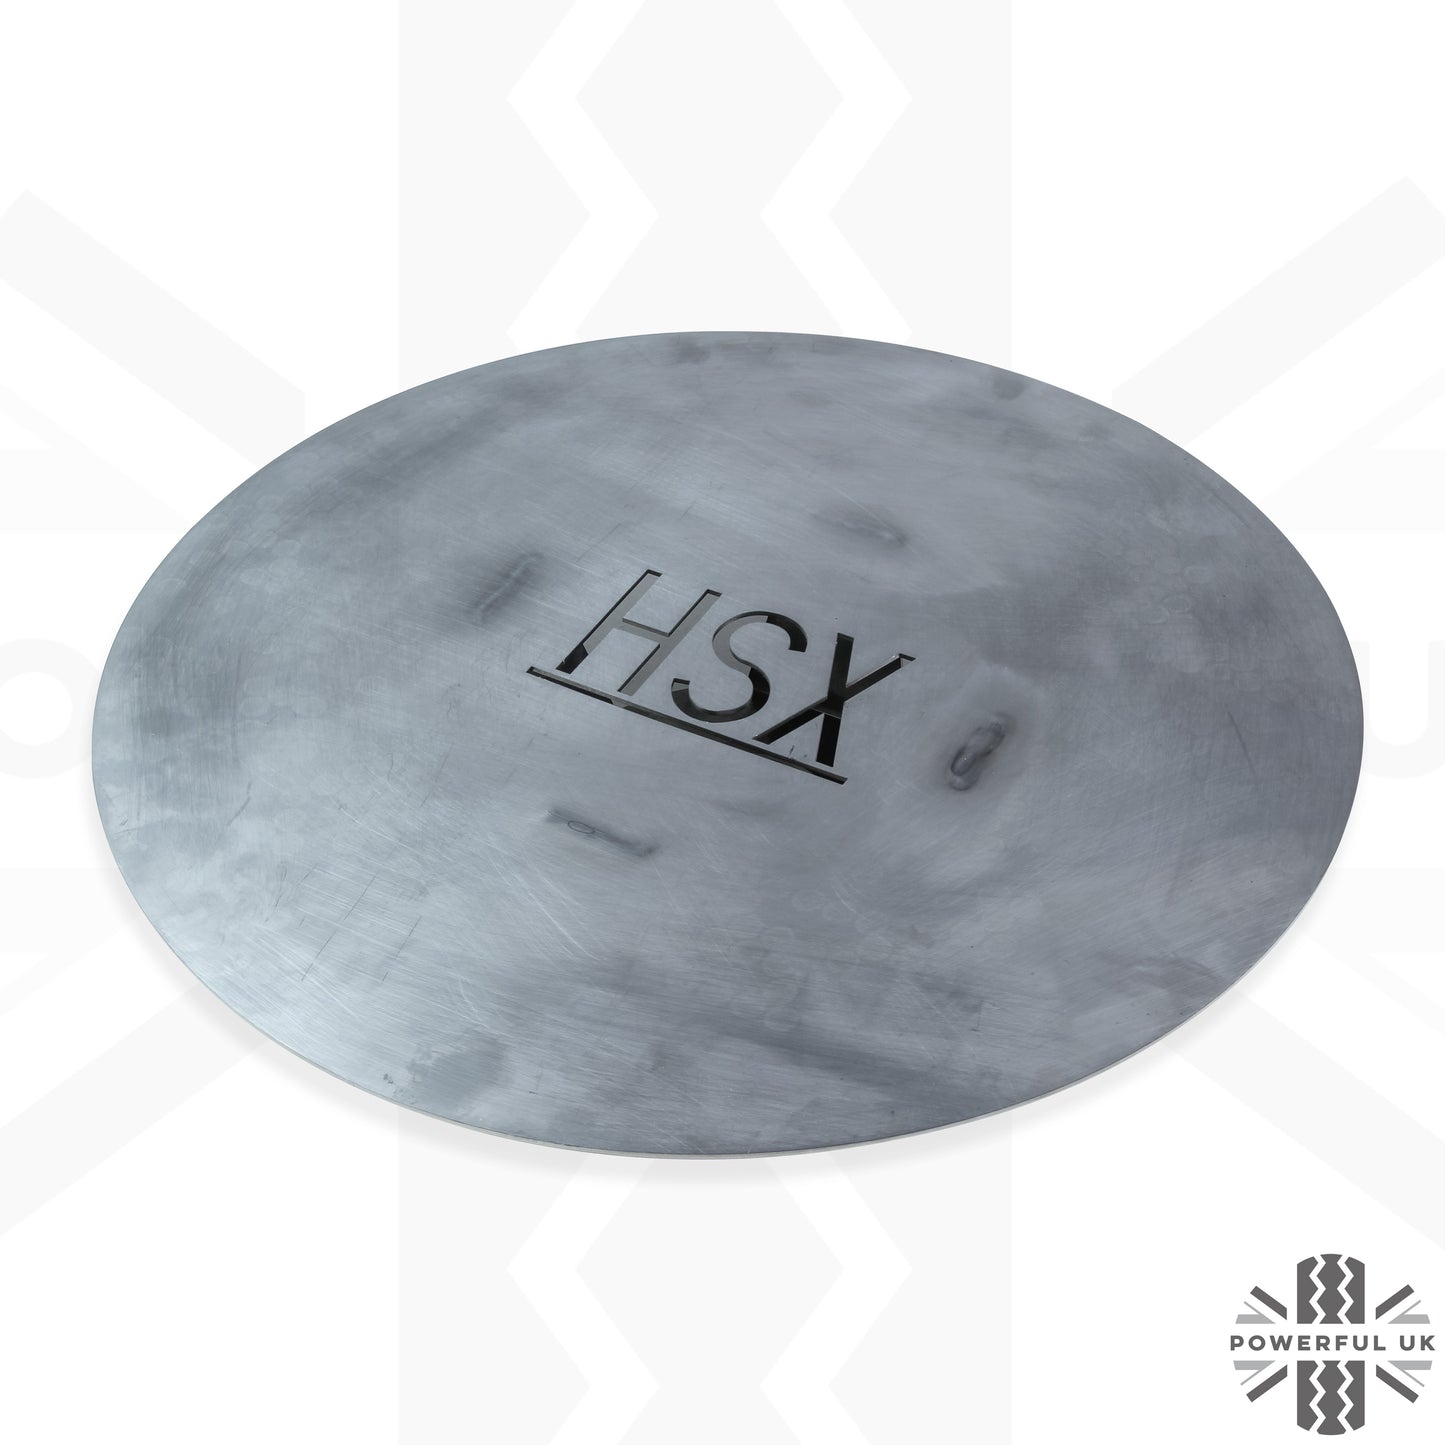 Spare Wheel Anti-theft Protection Disc - Stainless for Land Rover Discovery 5